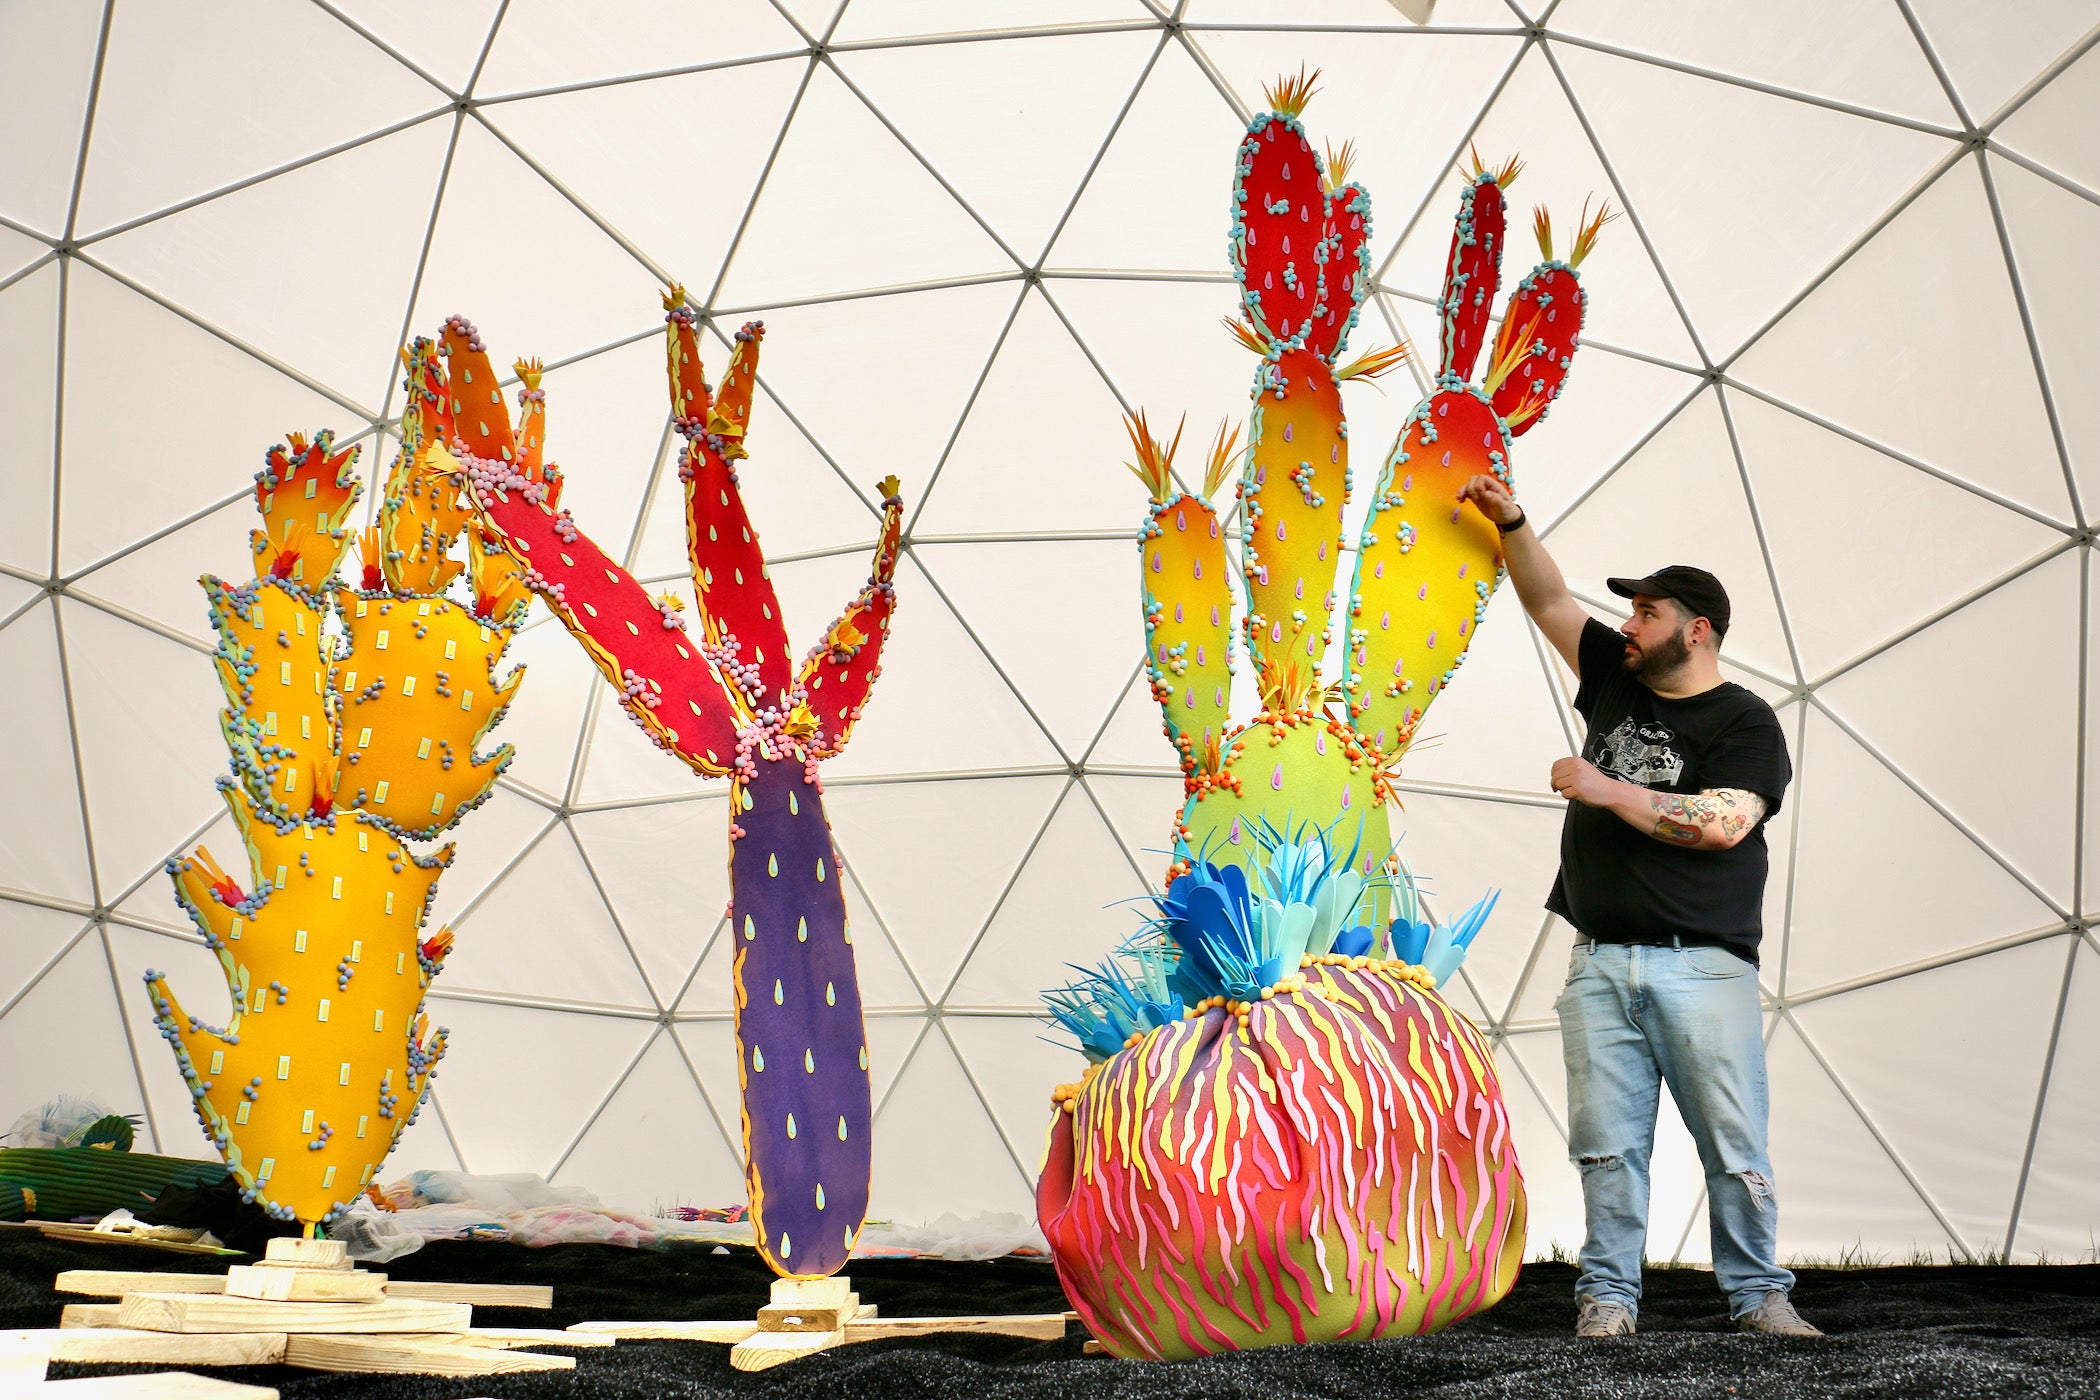 Foam Sculptures: Why Artists Prefer Foam for Large Installations